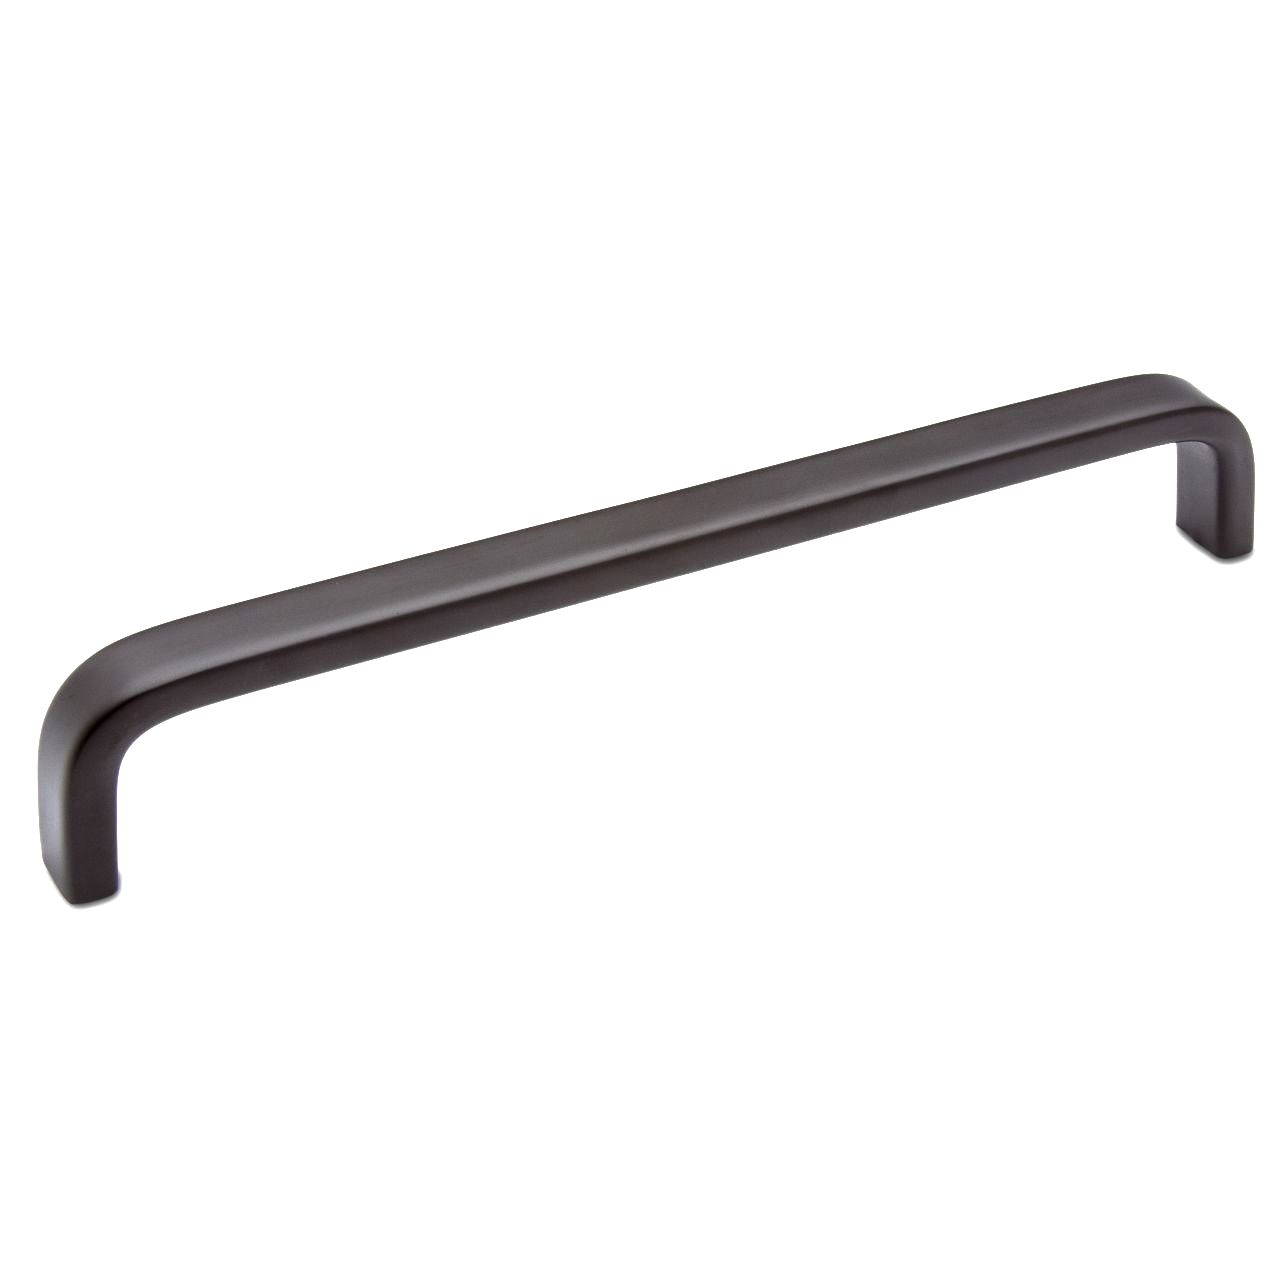 Black Cabinet Handles In Various Lengths Lock And Handle